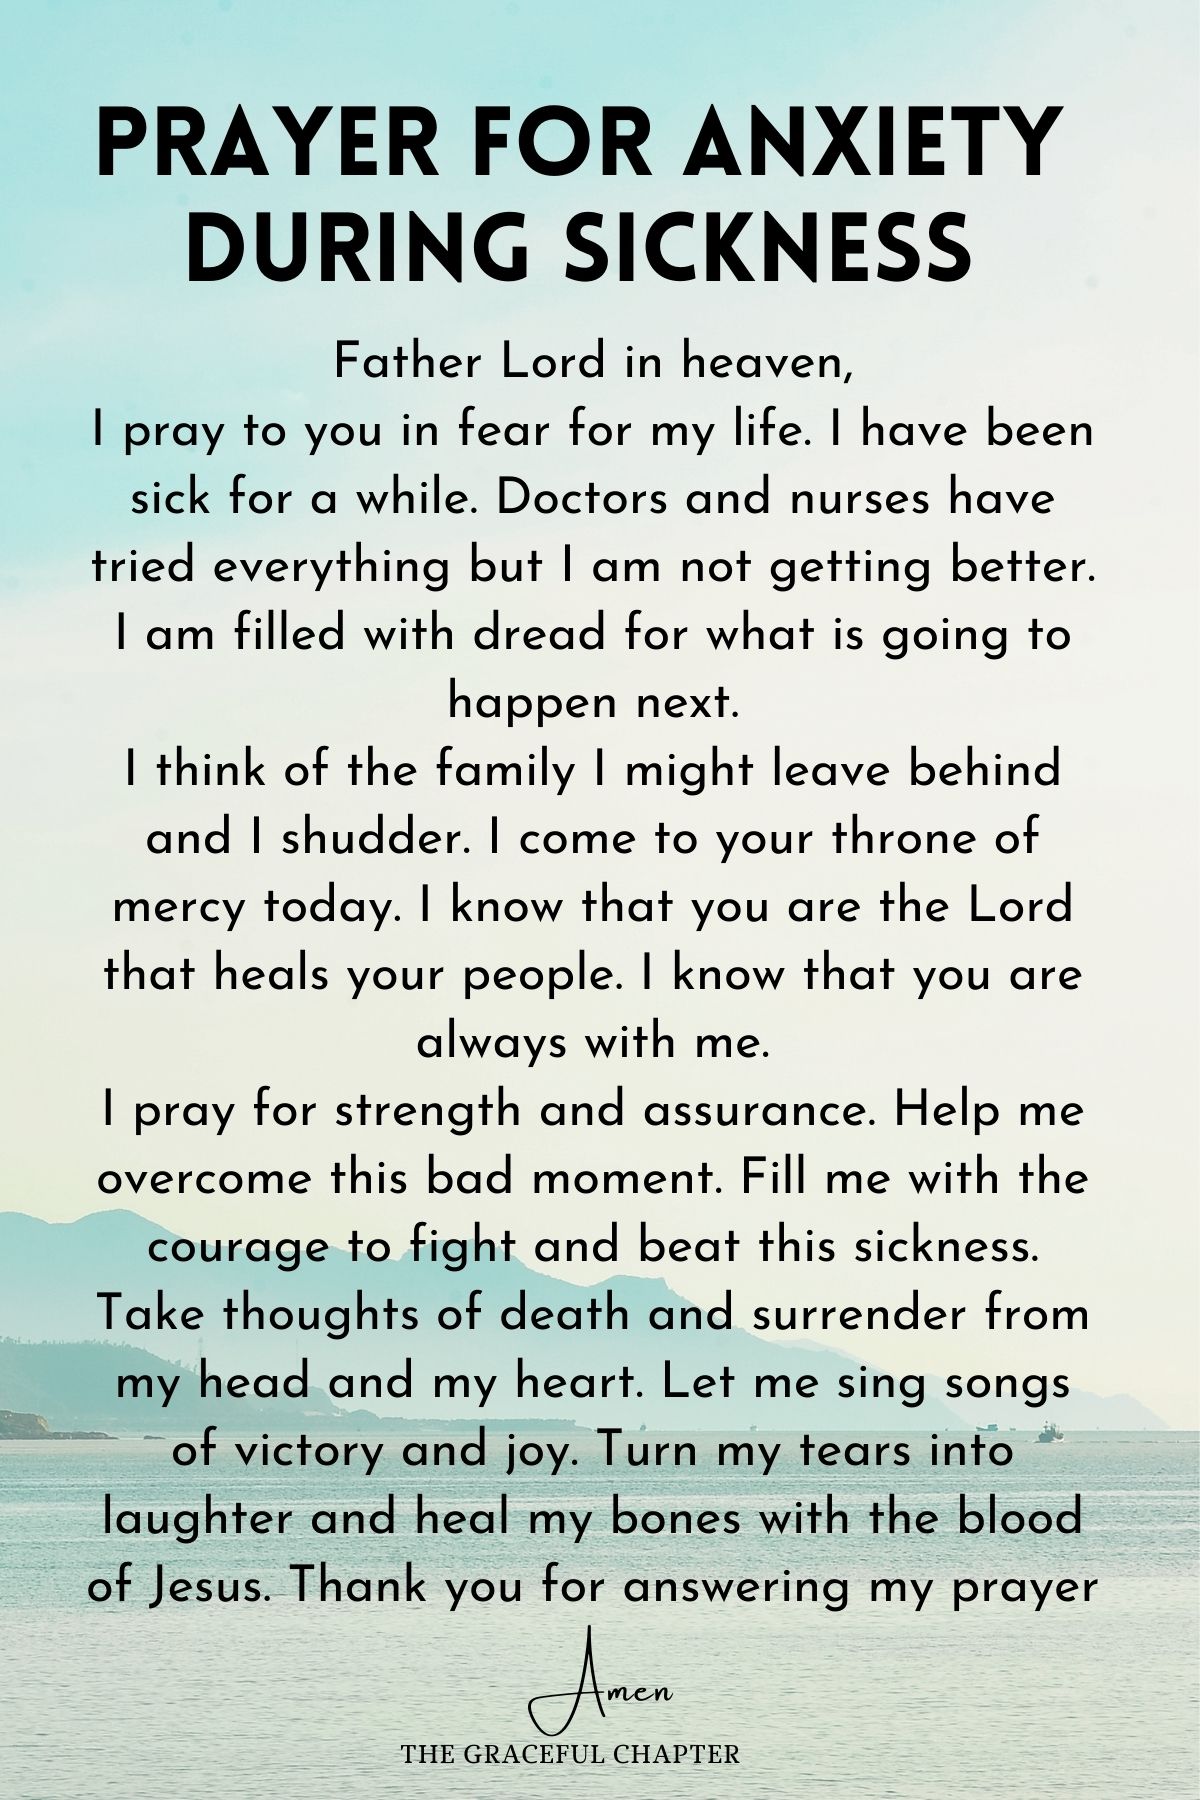 Prayer for Anxiety during Sickness